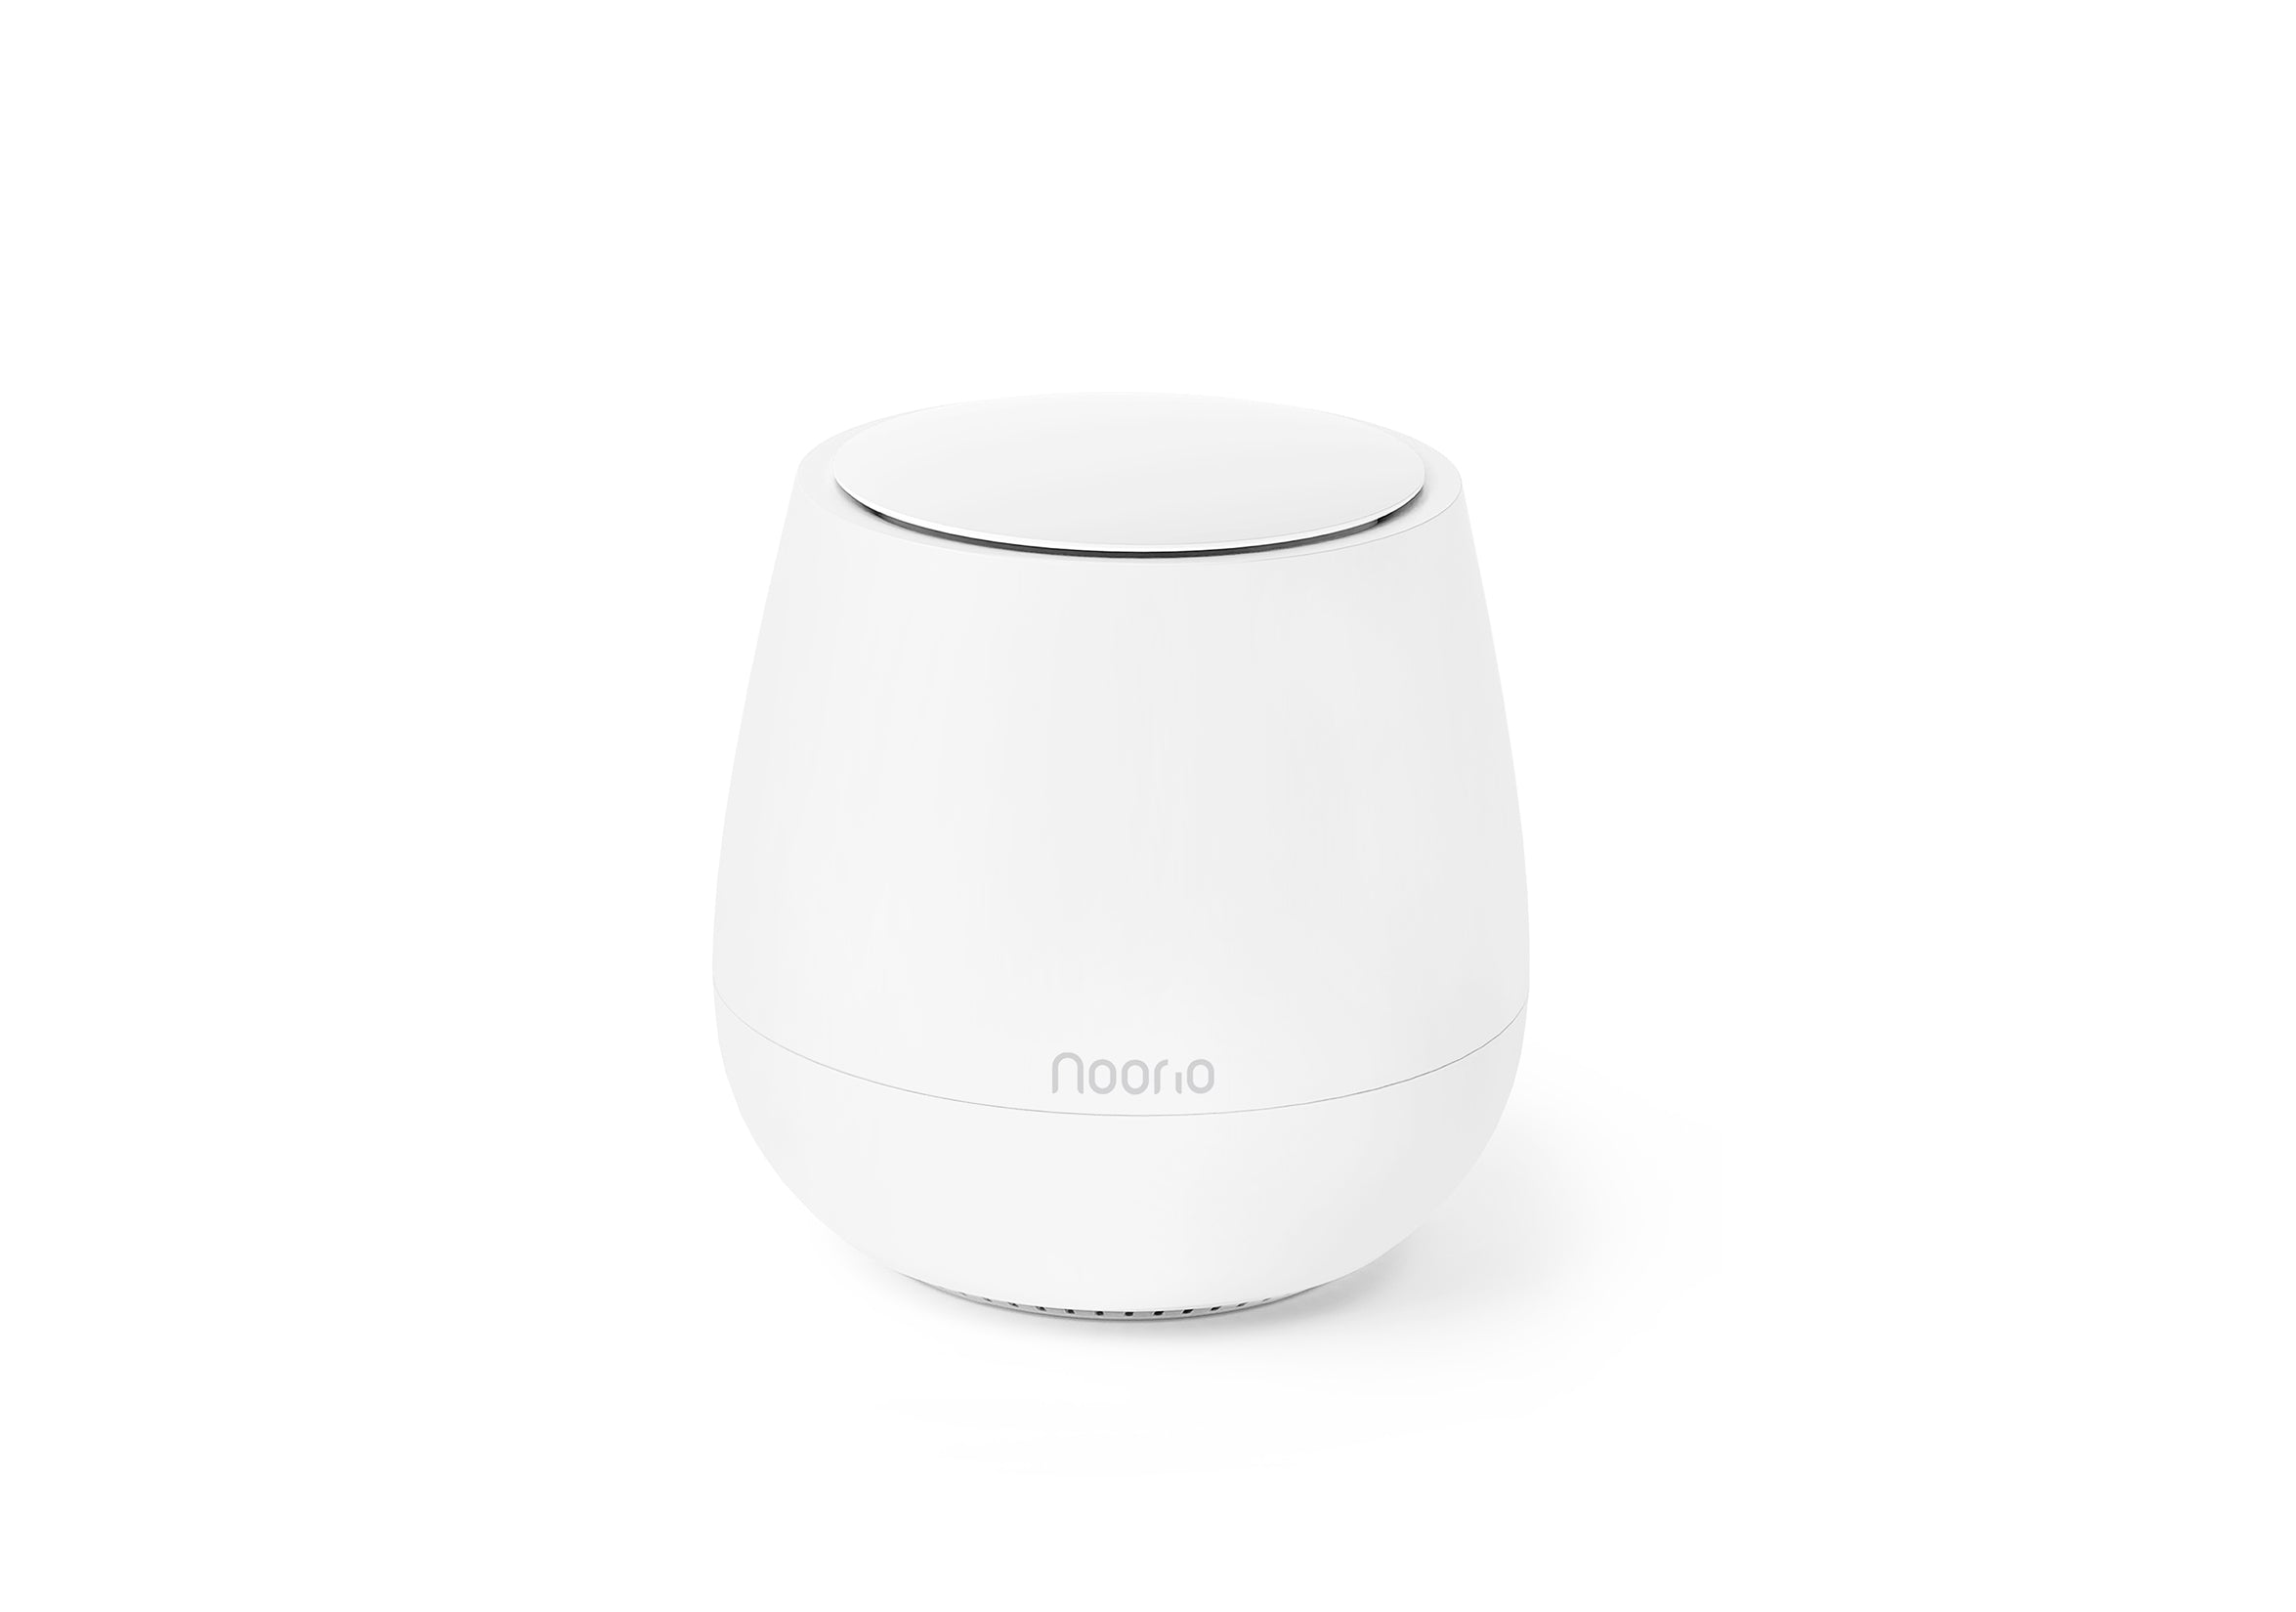 Noorio Smart Hub: Centralized Control, Enhanced Compatibility, Extended WiFi Coverage, No Hidden Costs